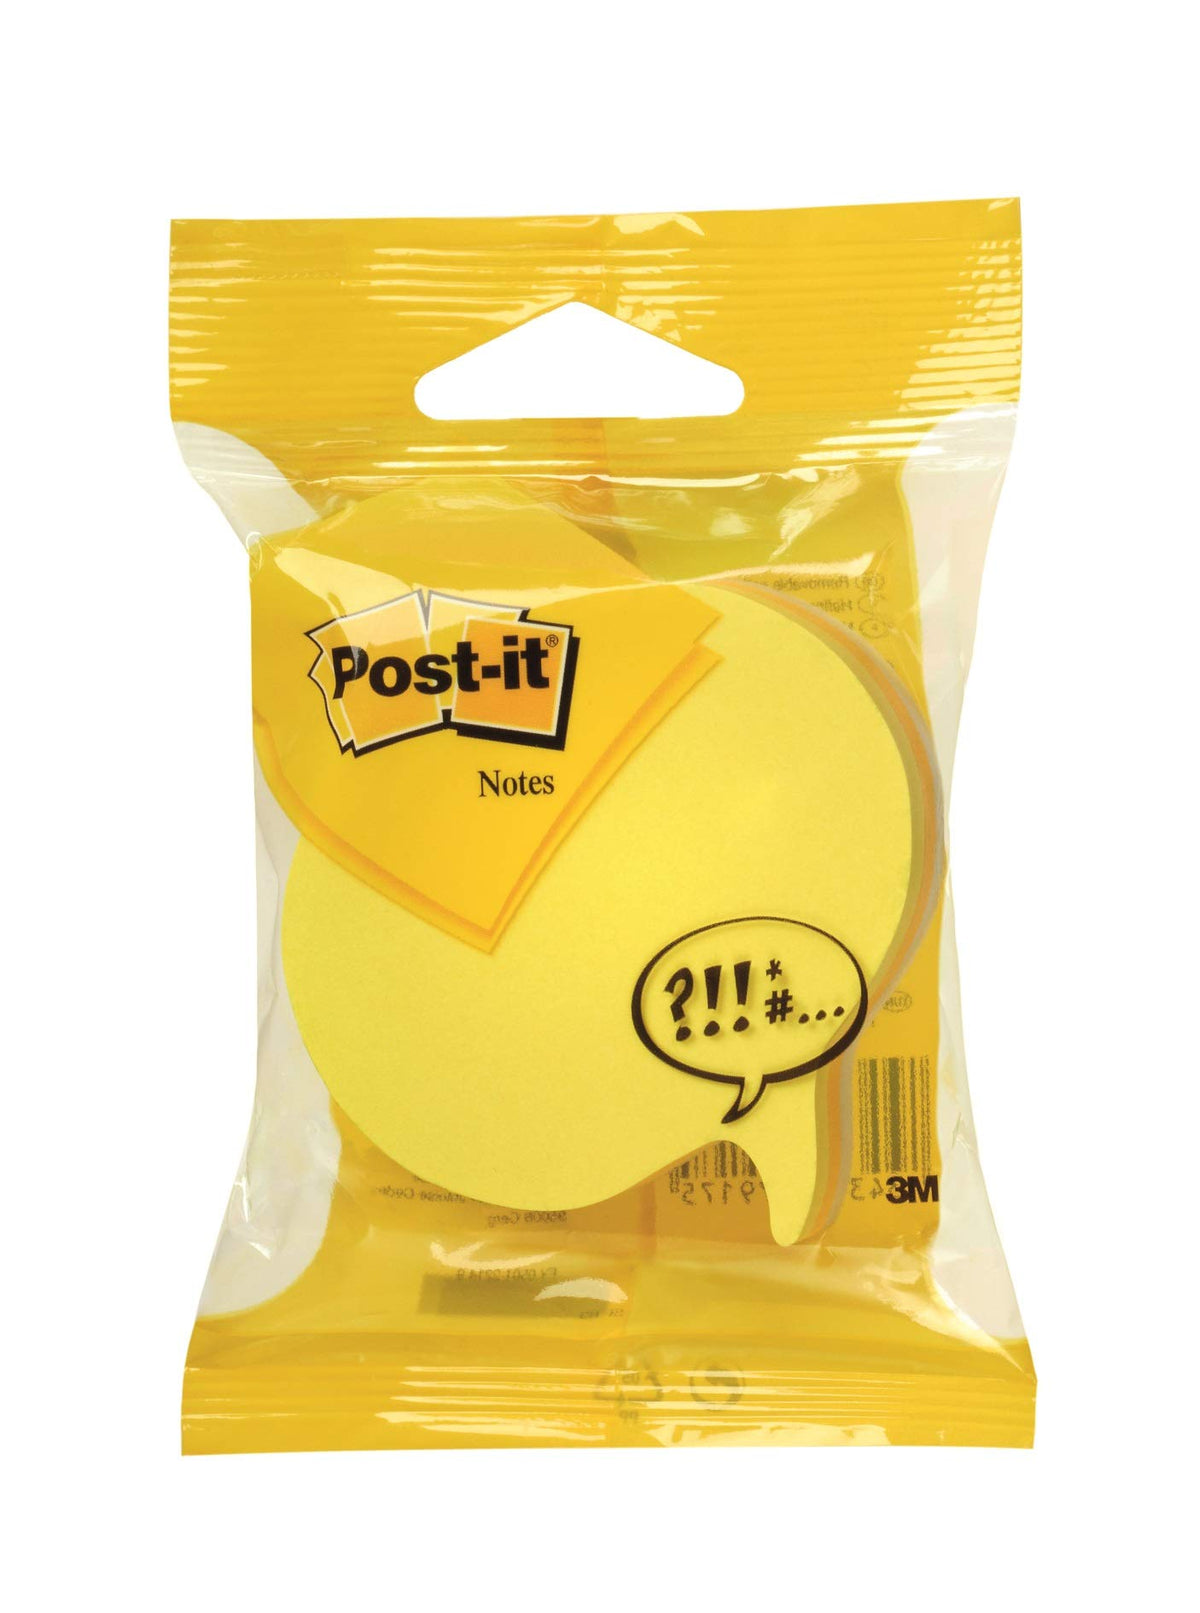 Post-it Notes Die-Cut Shape, Speech Bubble, Yellow, 70 mm x 70 mm, 76 Sheets/Pad, 3 Pads, Yellow/Grey - Self-stick Notes For Note Taking, To Do Lists & Reminders